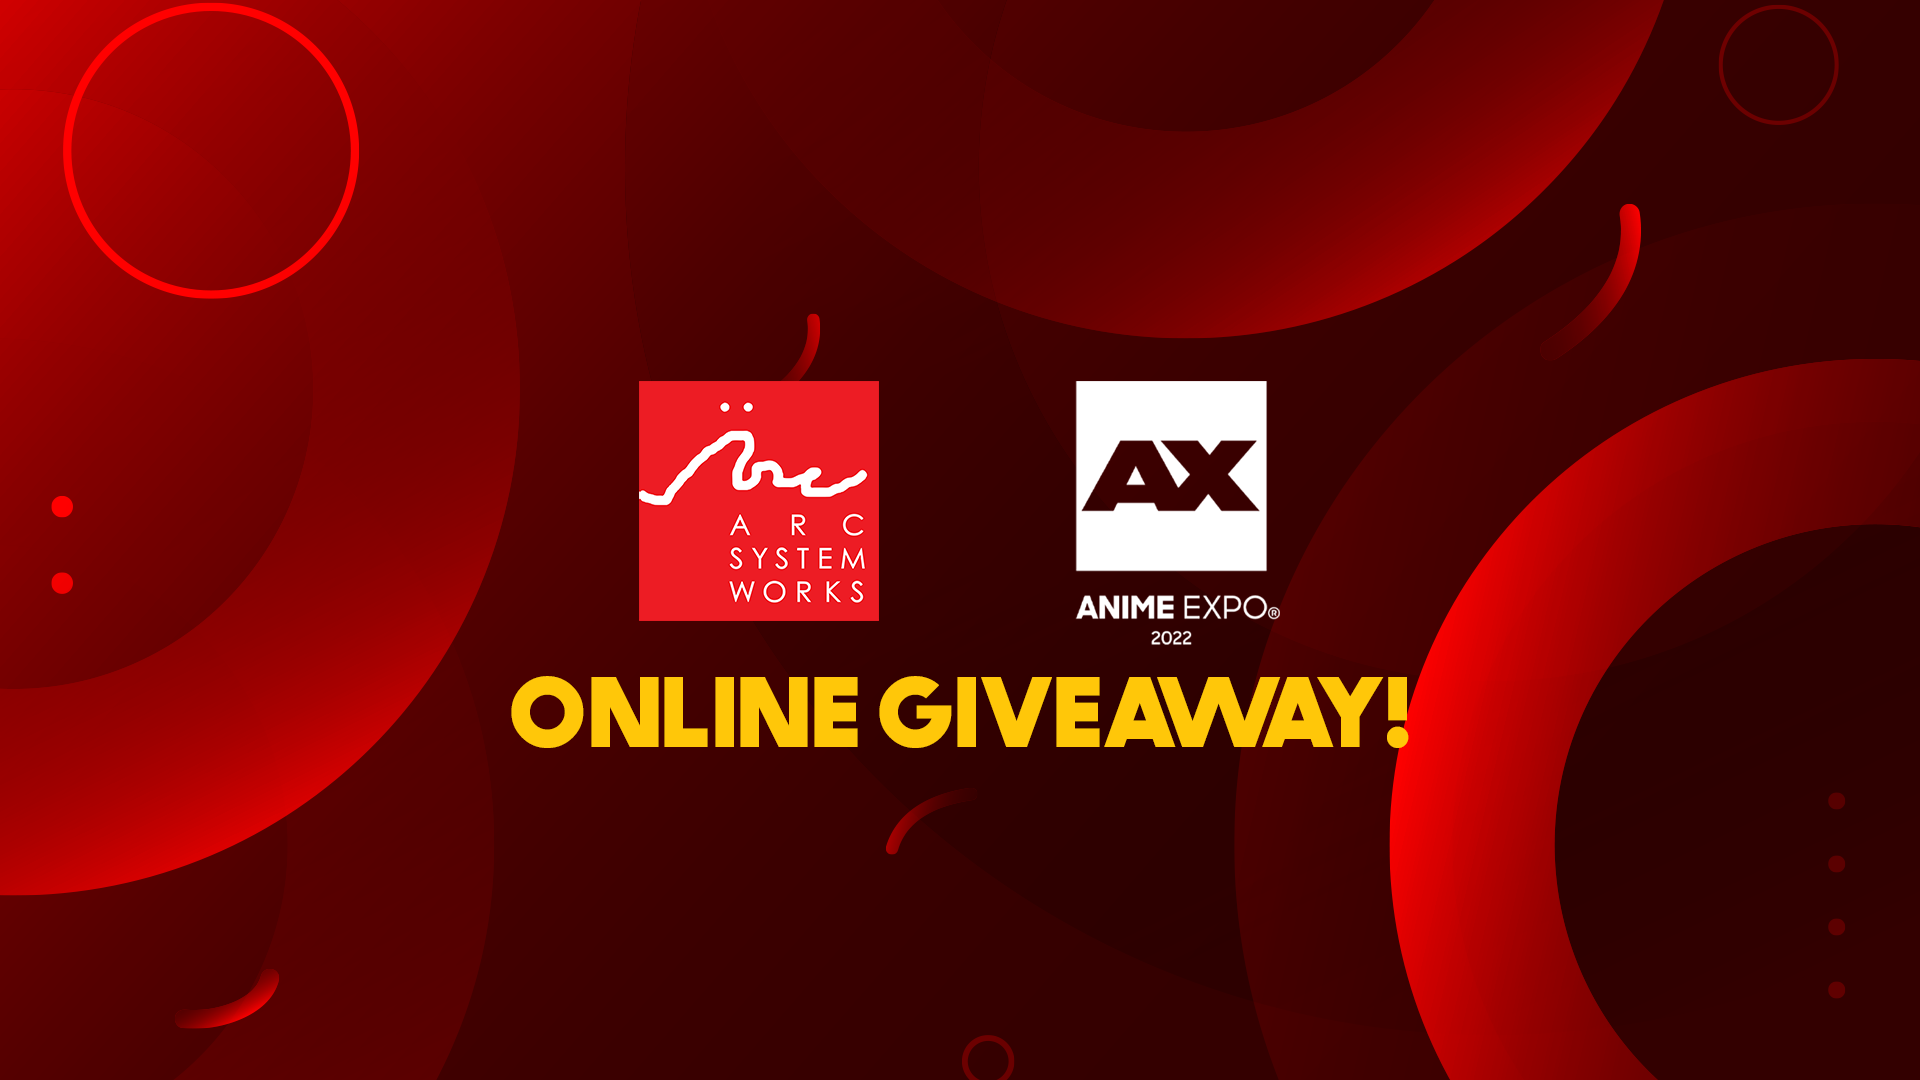 Anime Expo Online Giveaway!